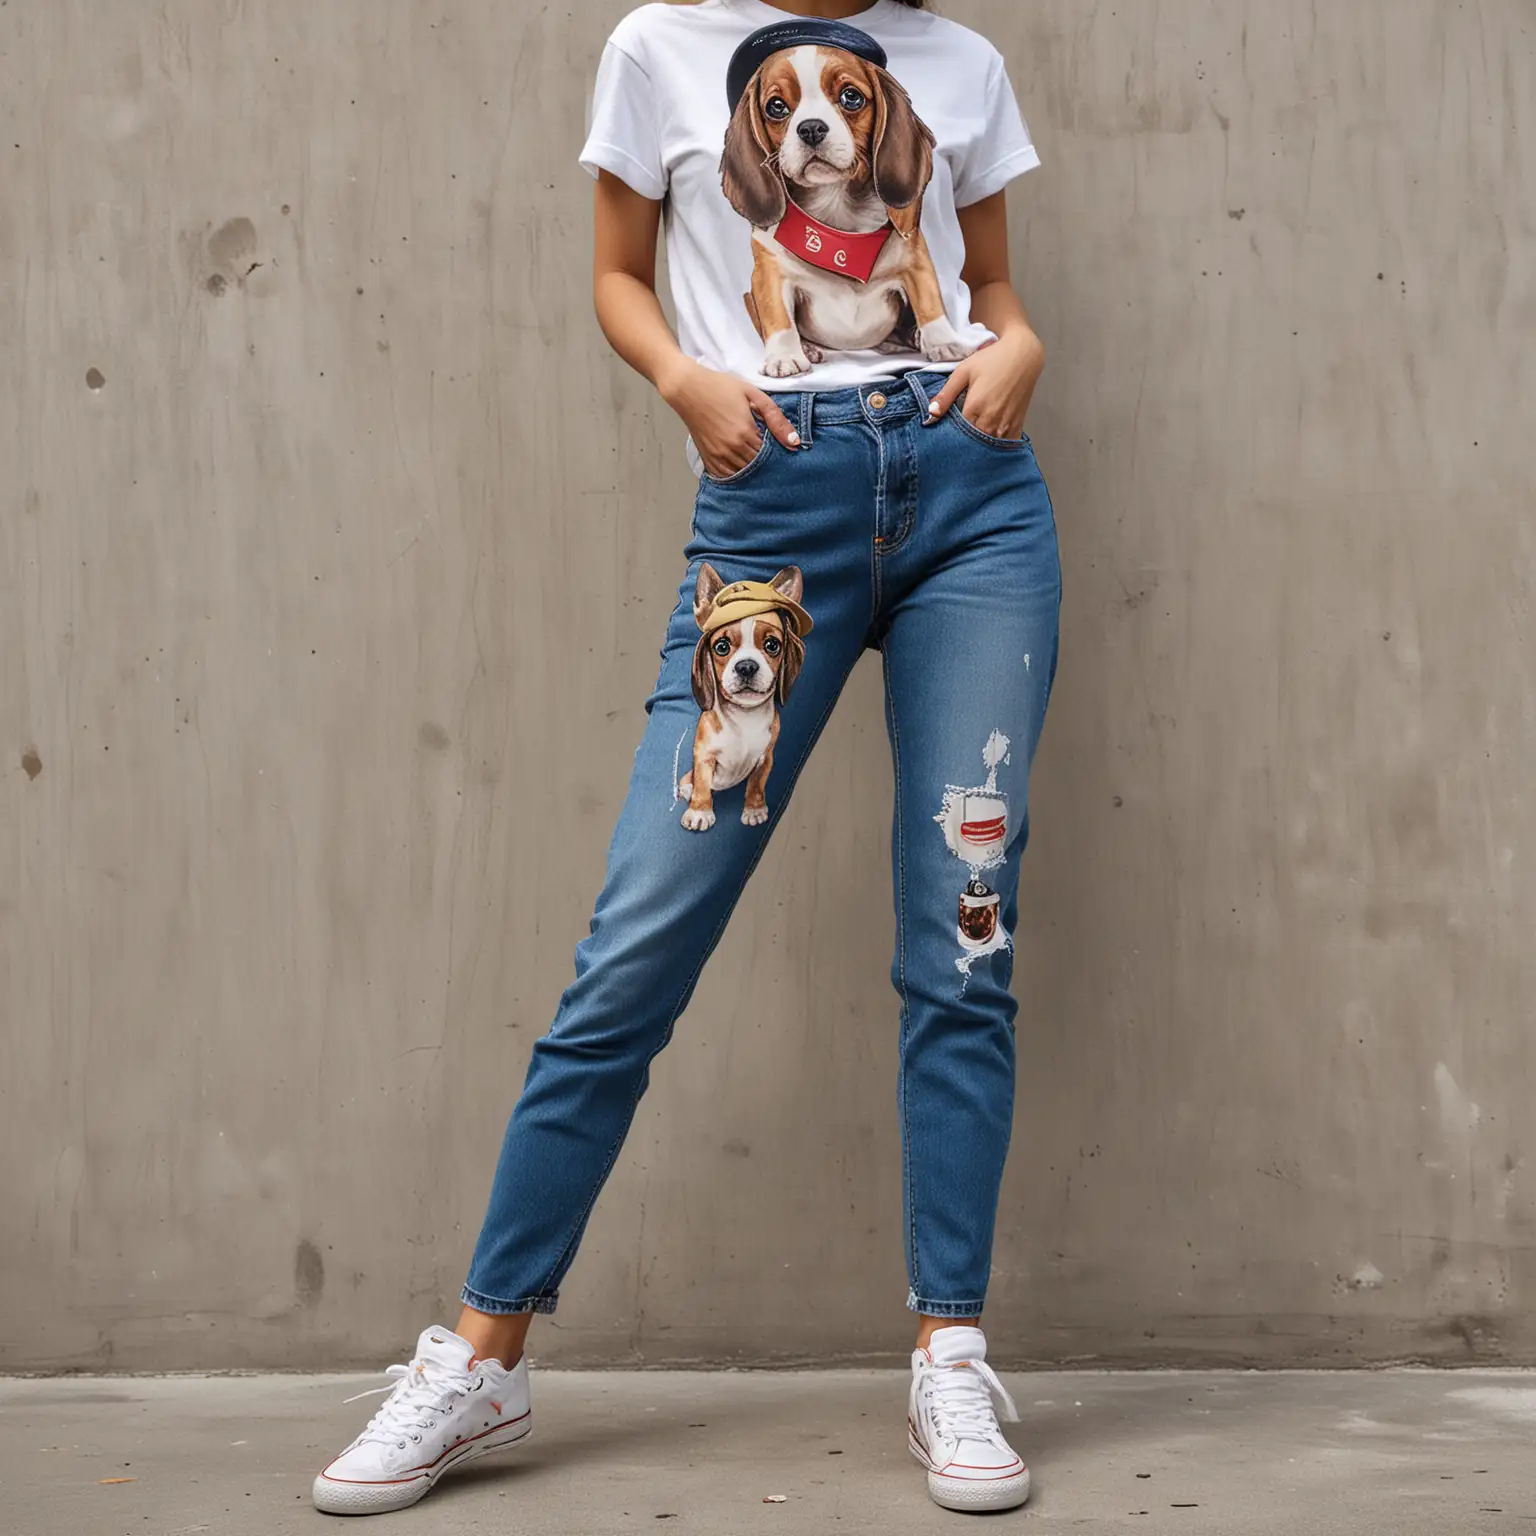 Women in Denim Jeans with Adorable Puppy Painting